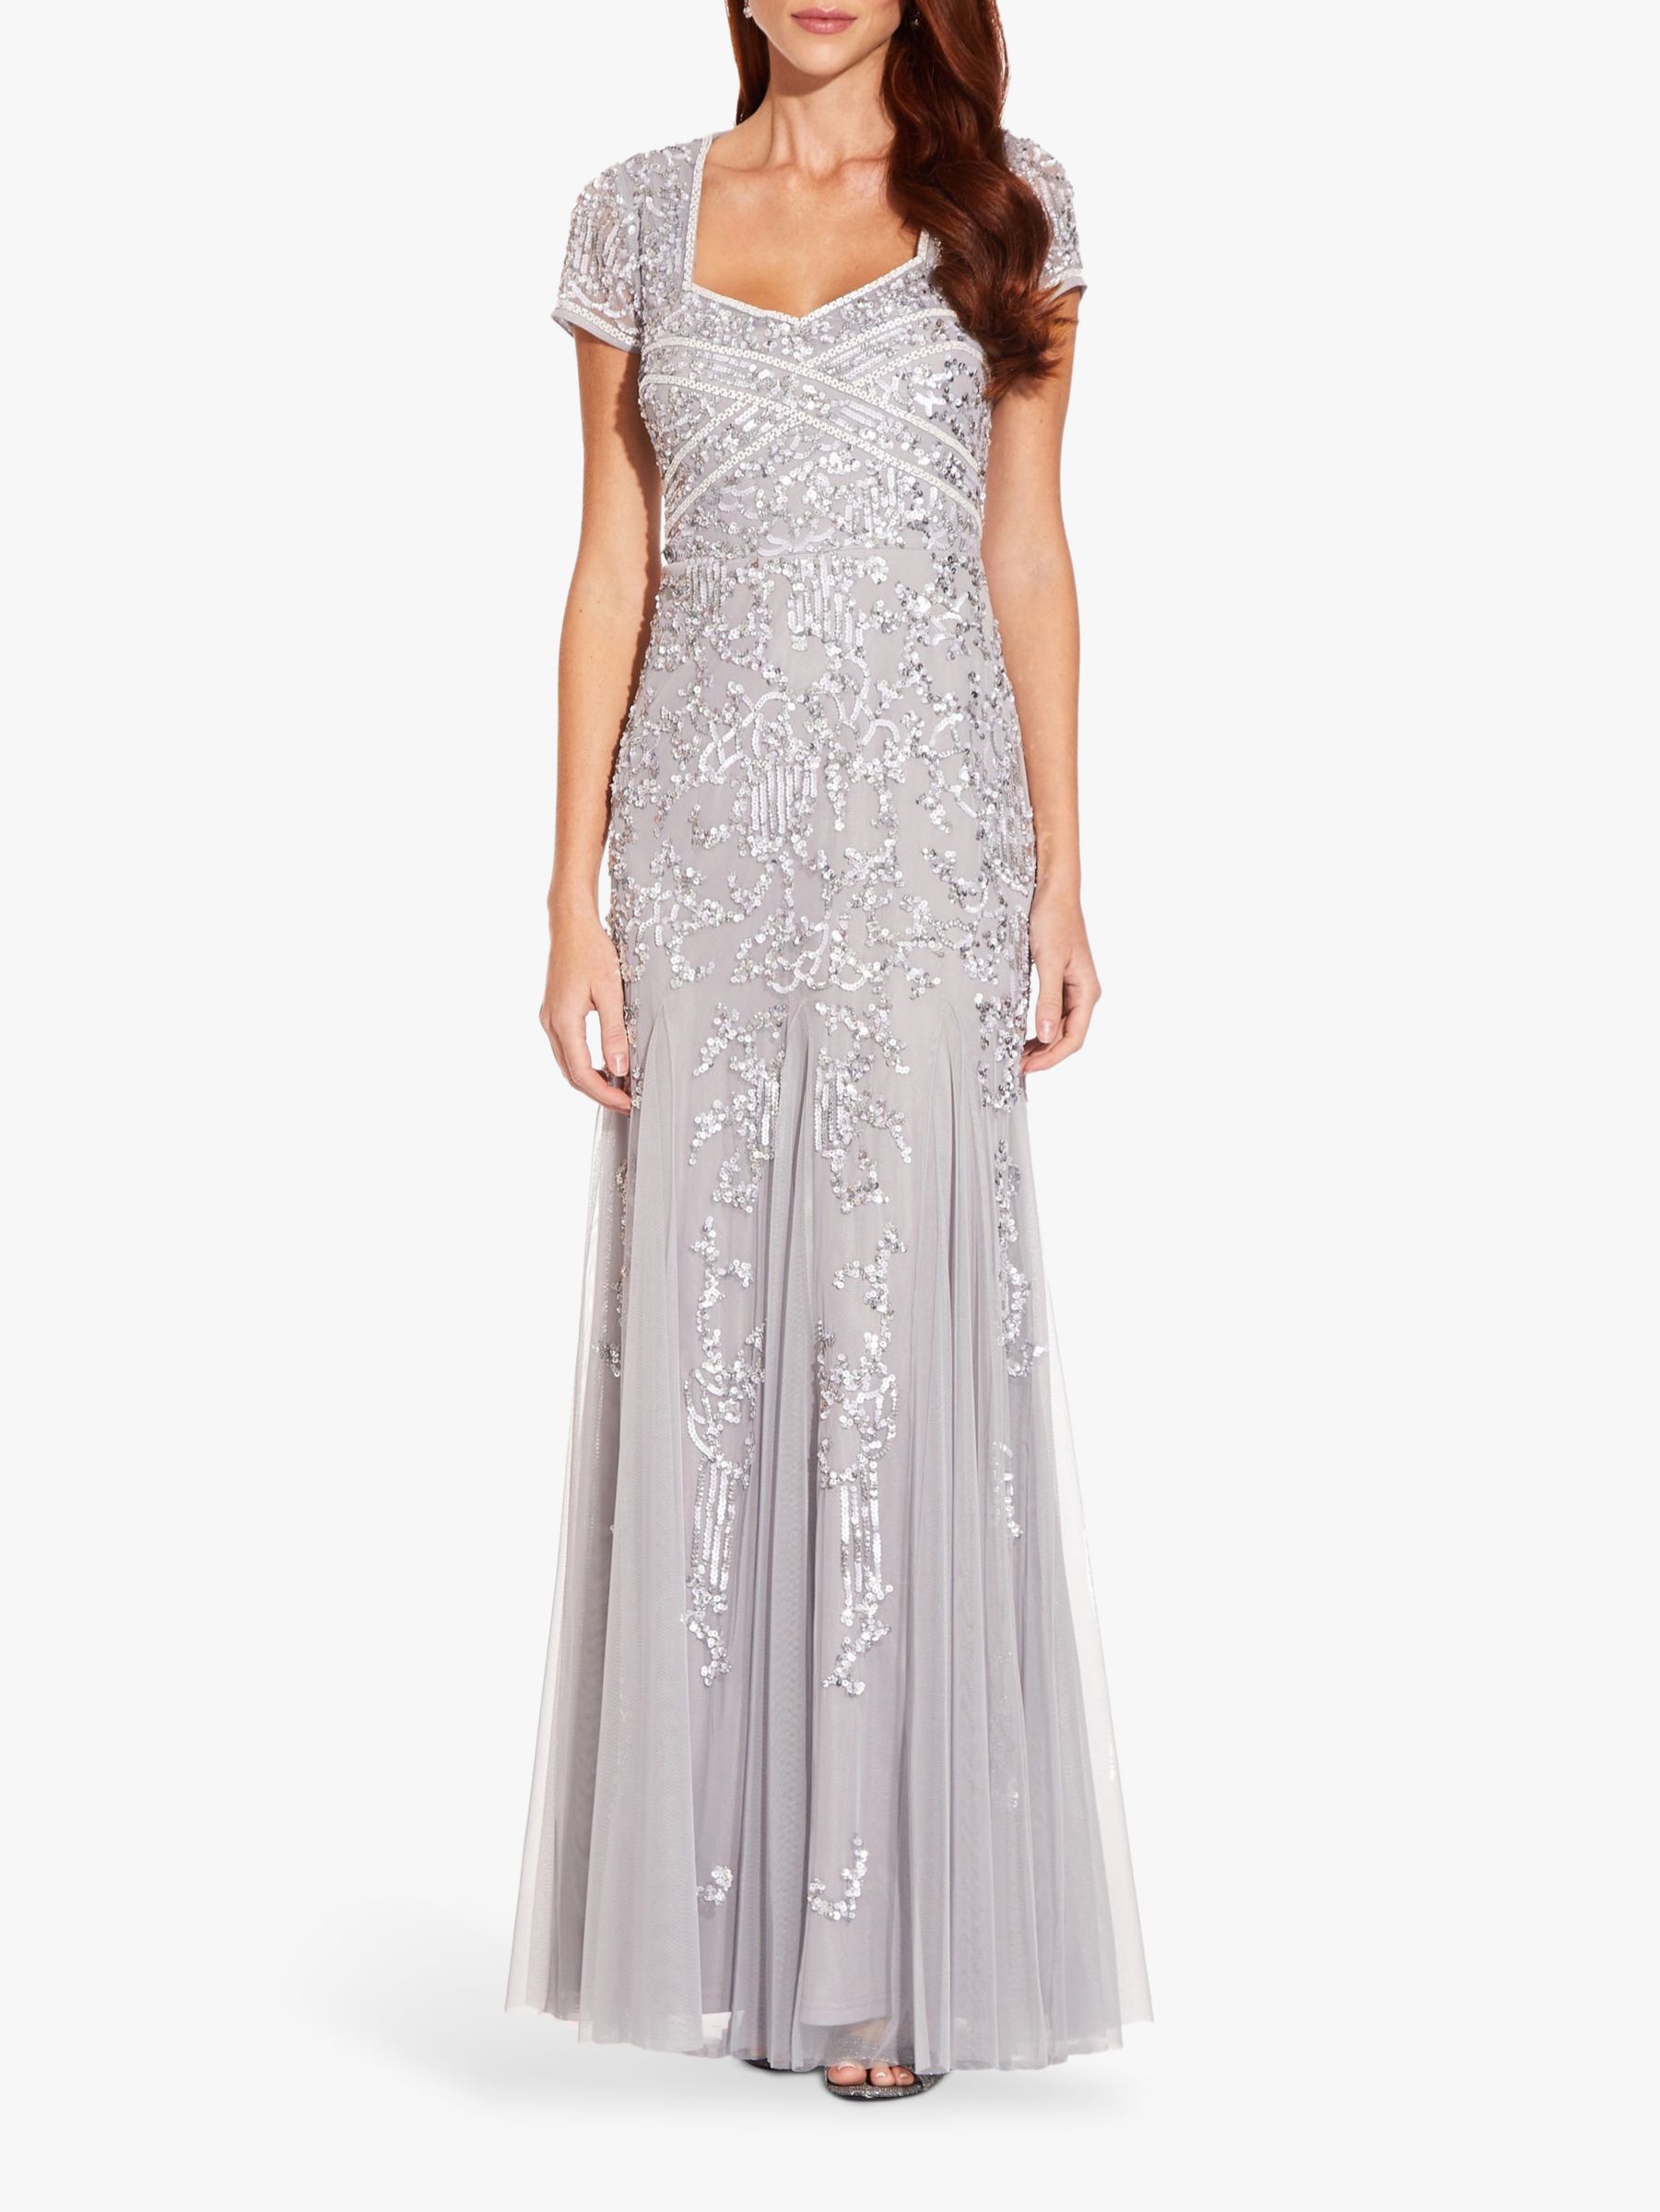 Adrianna Papell Beaded Godet Gown Silver mist